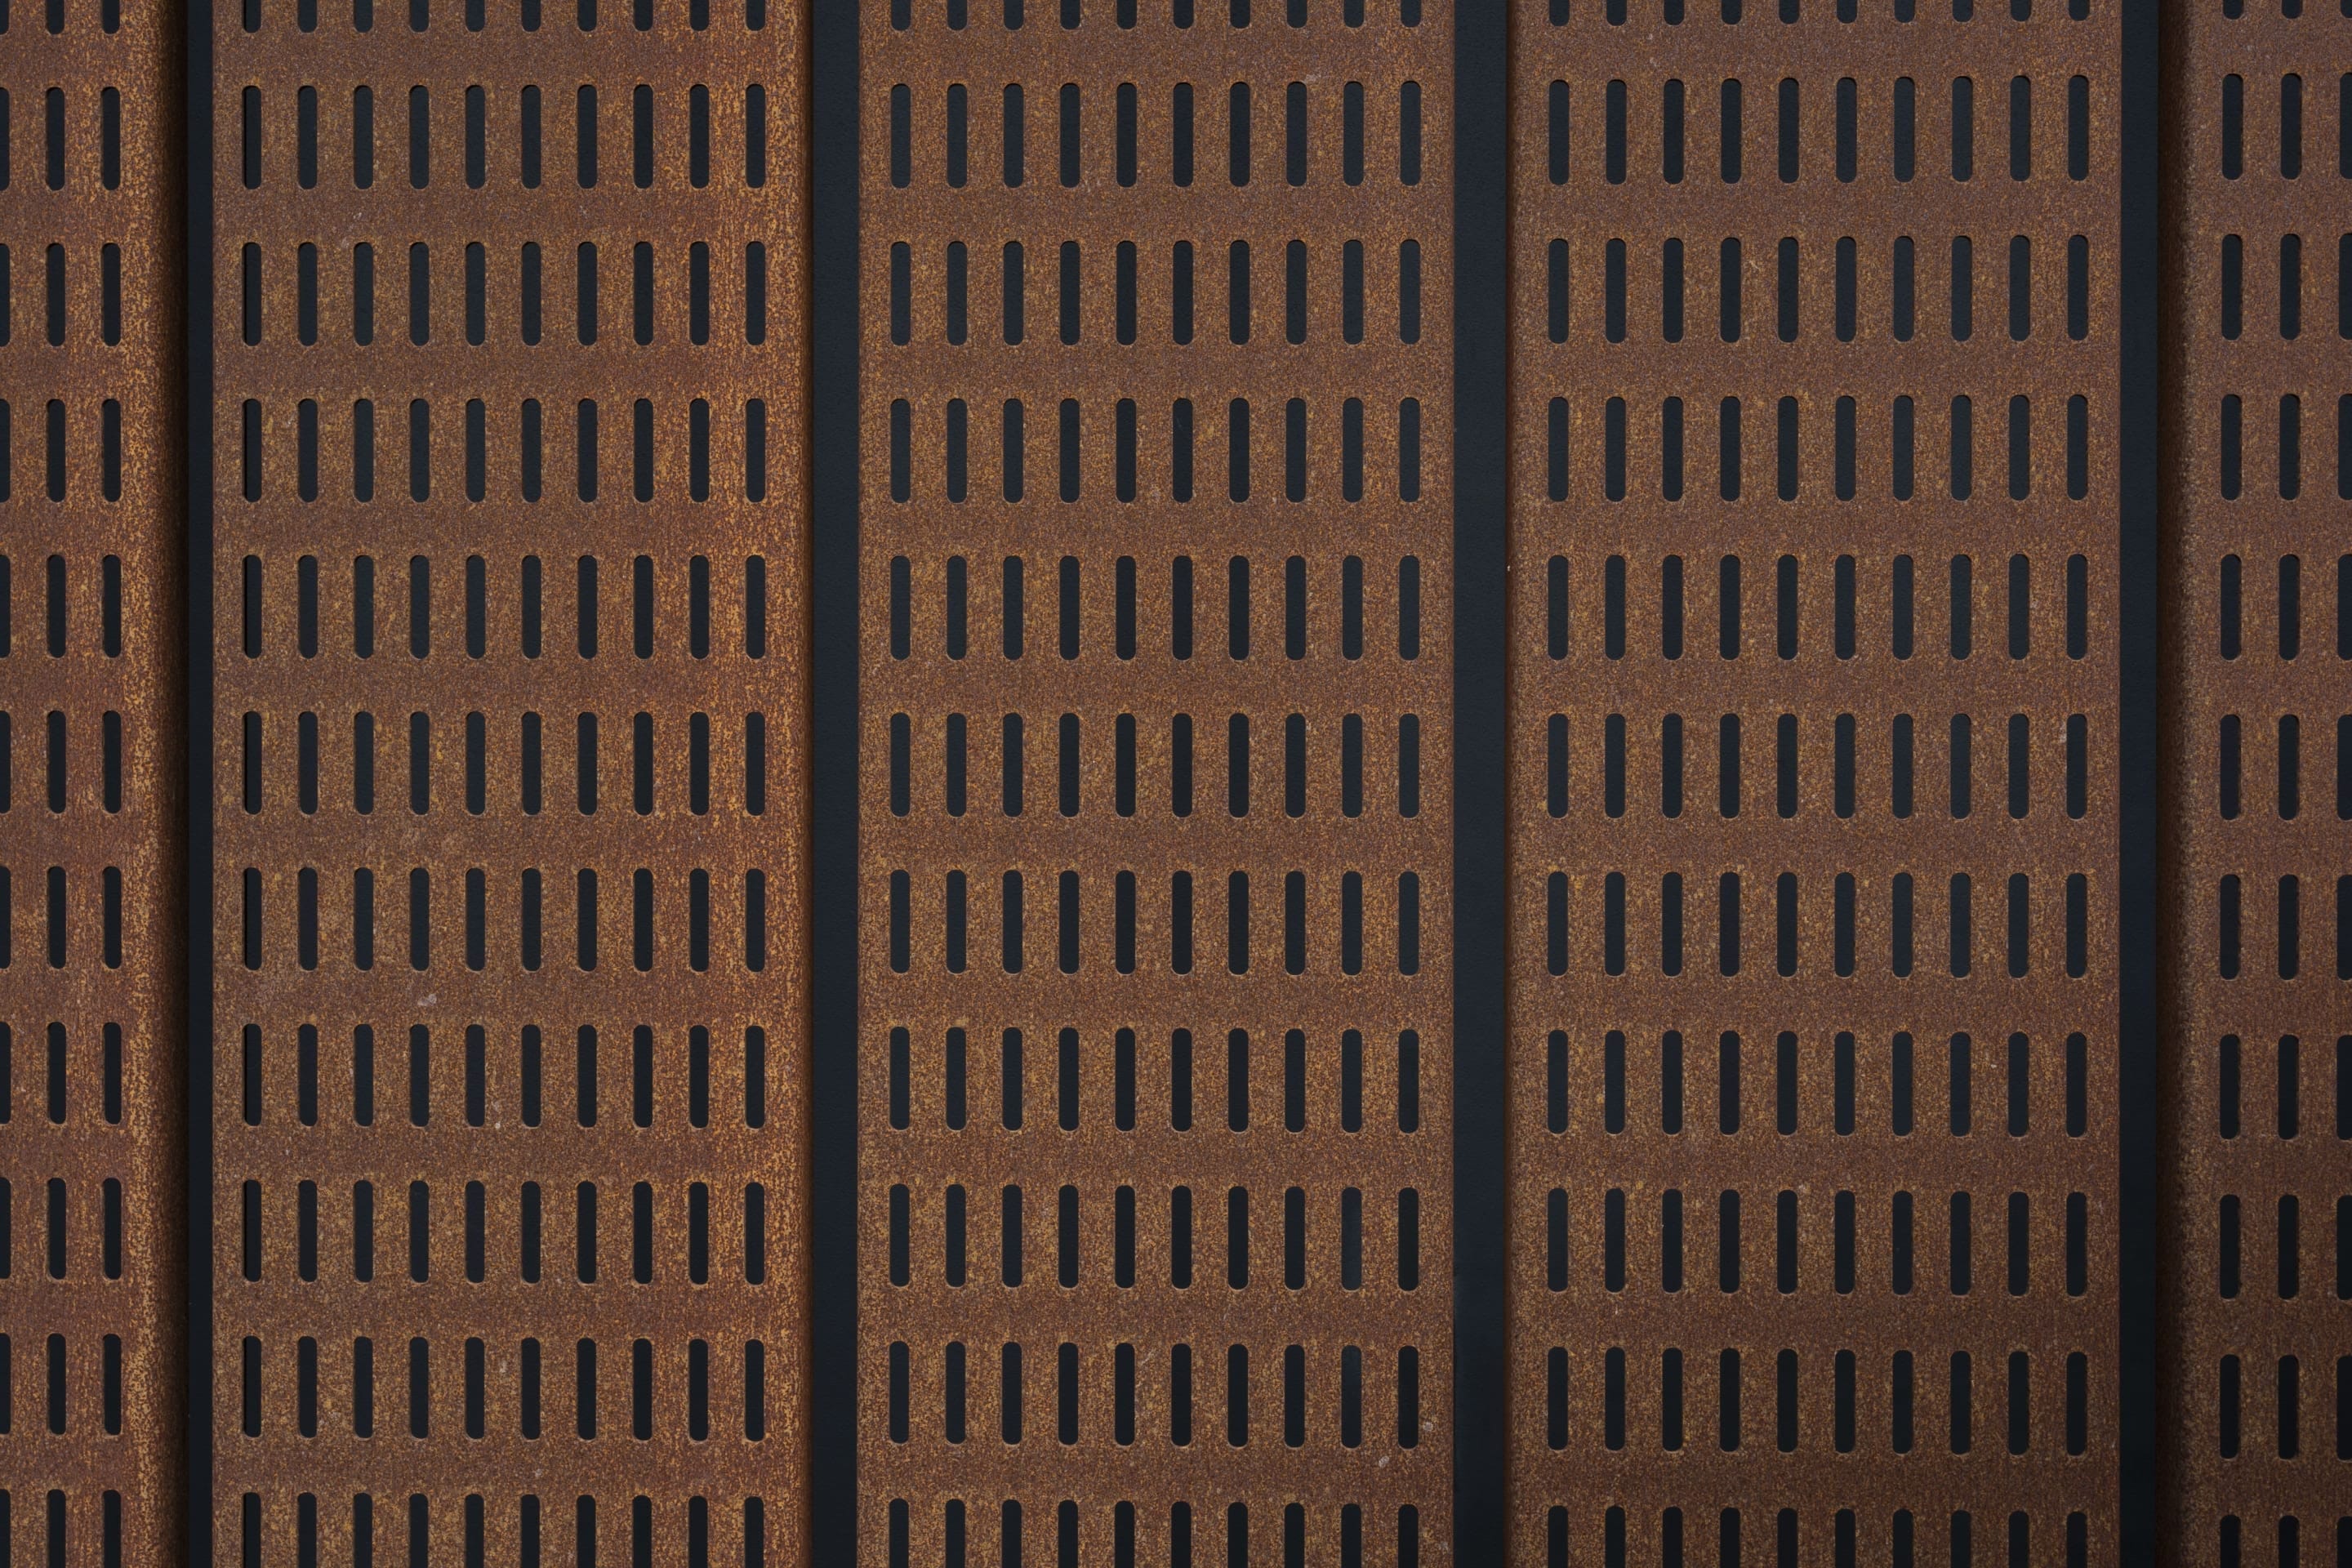 Custom perforated Solanum™ Weathering Steel by Zahner®